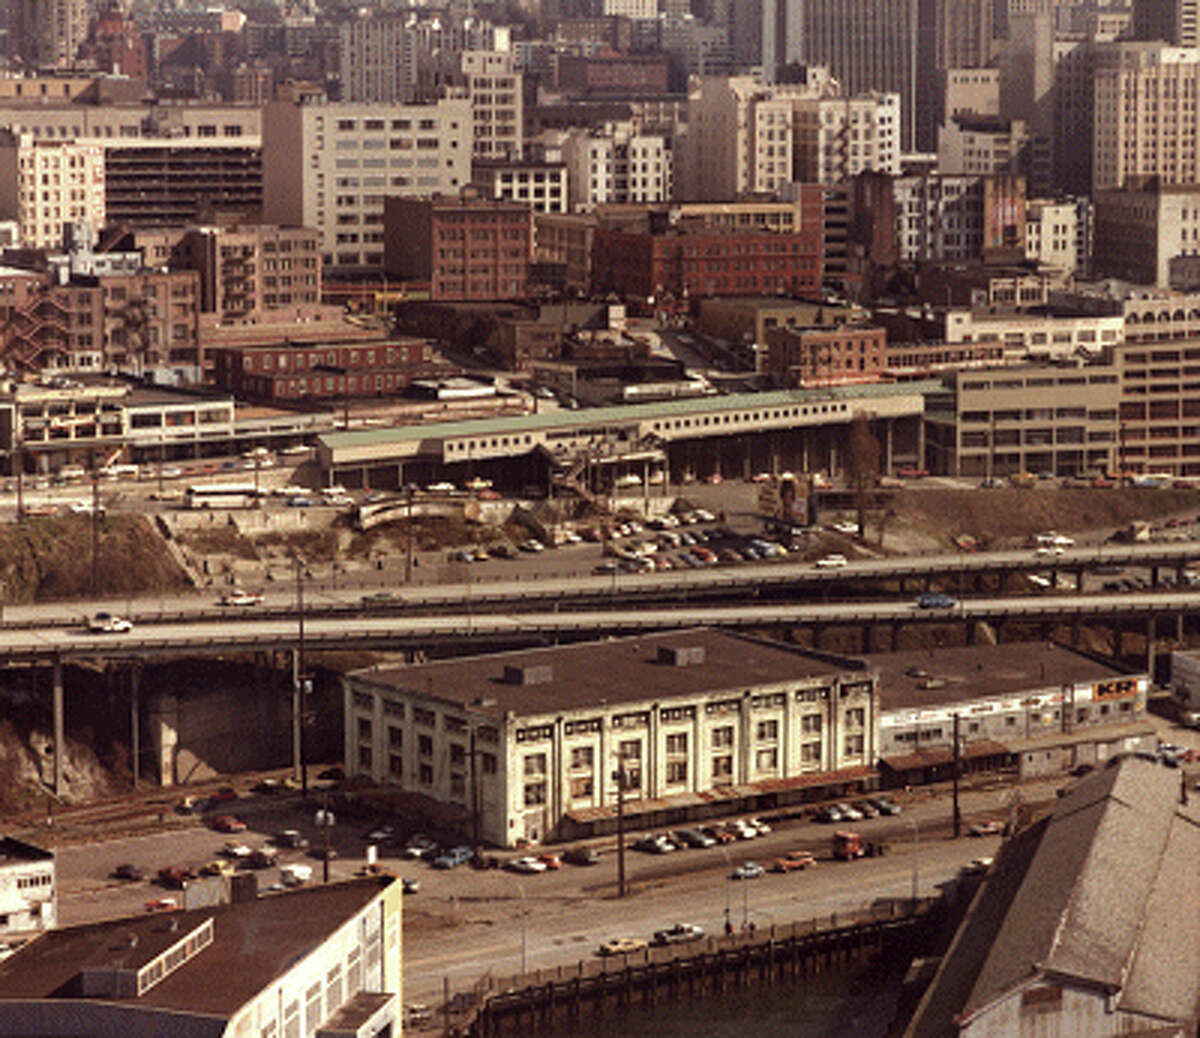 Pike Place Market pictured in Mar 13, 1979.